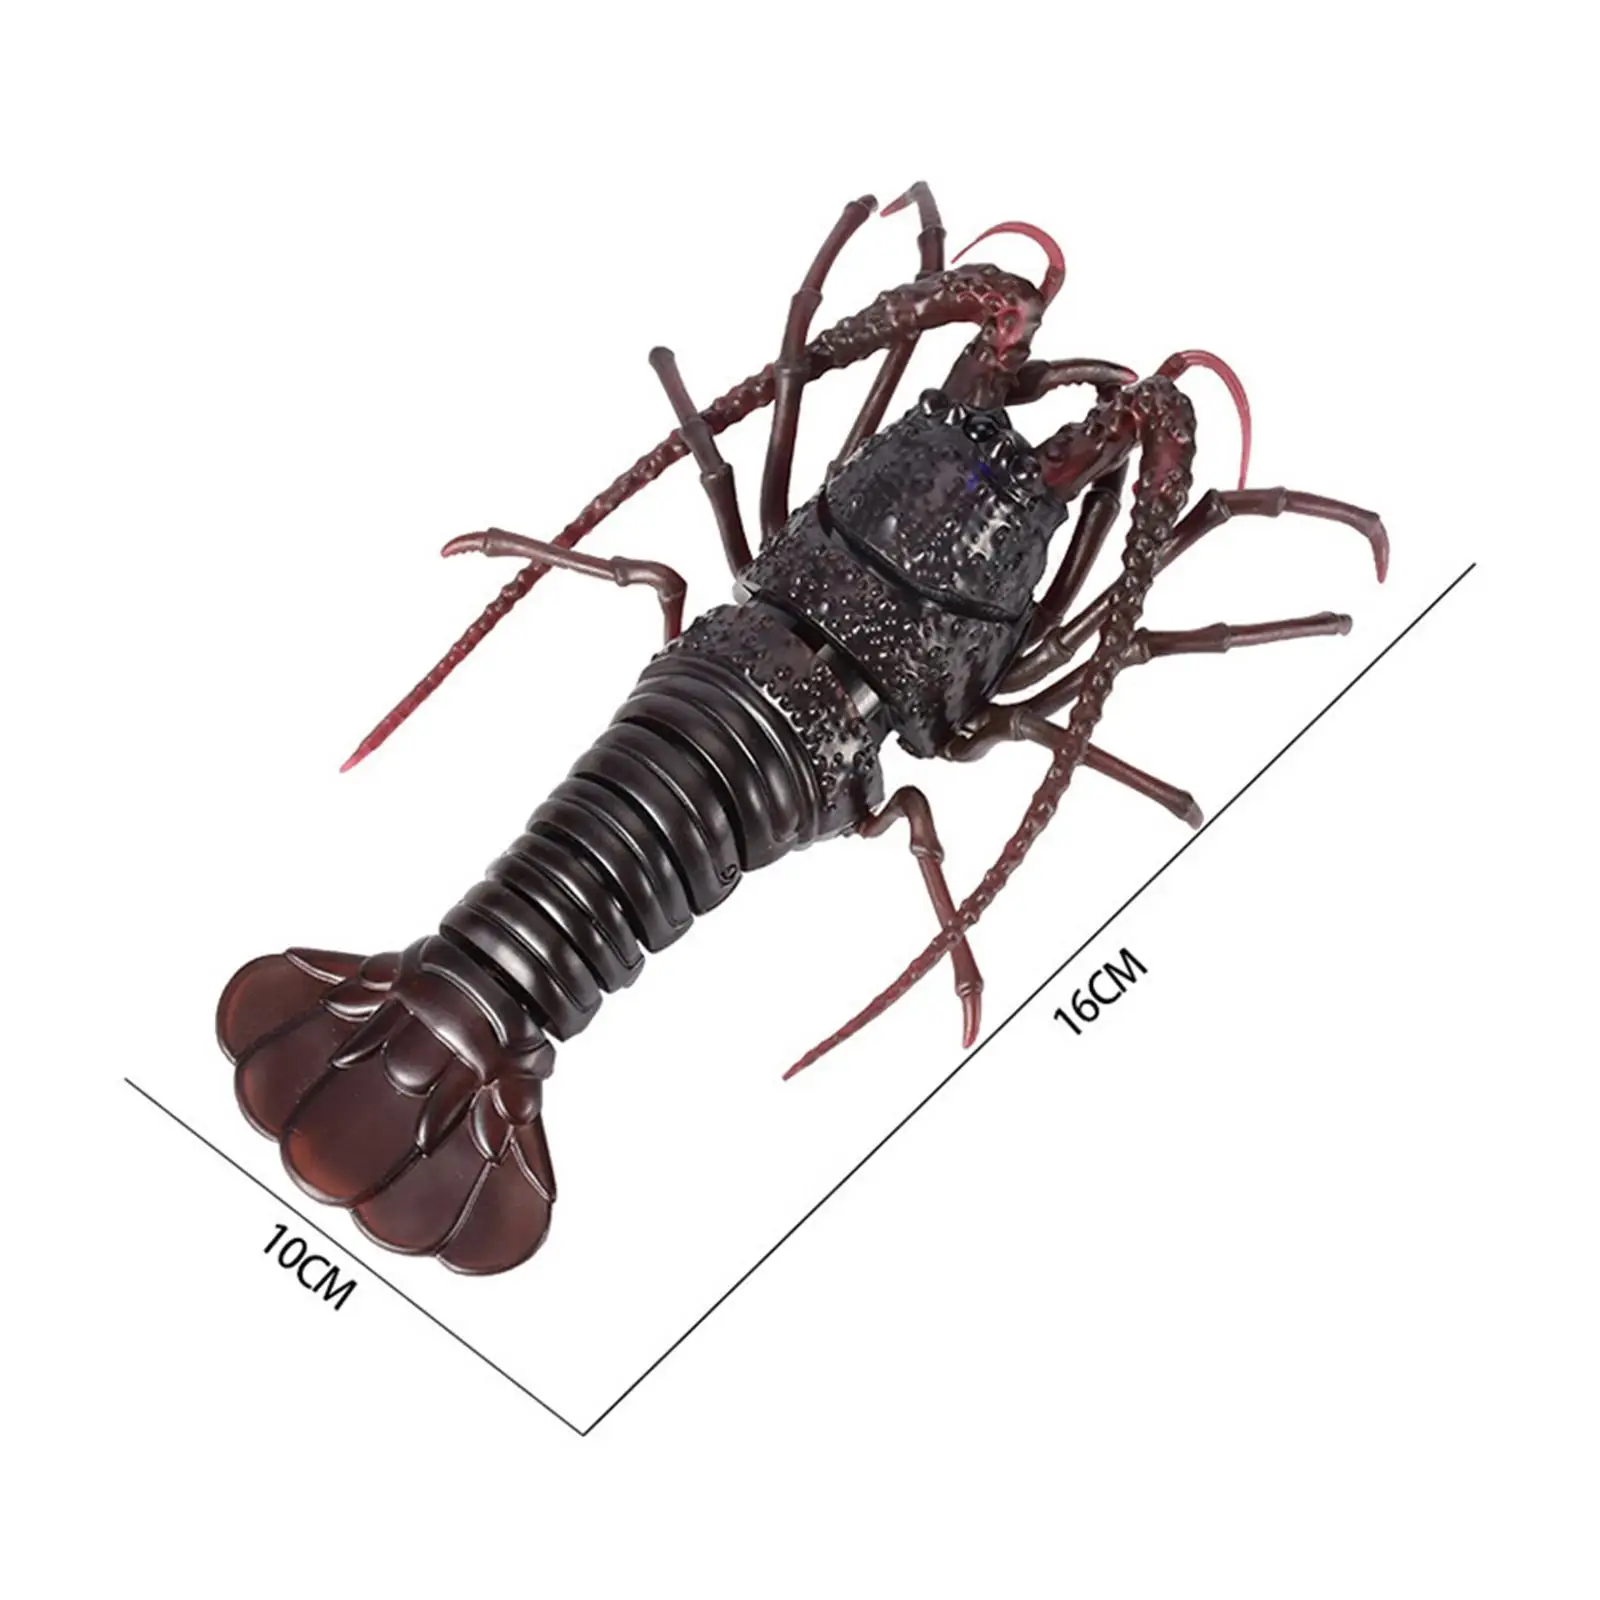 Simulation RC Crawfish Realistic Remote Control Vehicle Car Animal Pet Model Electric Infrared RC Shrimp for Kids Girls Boys